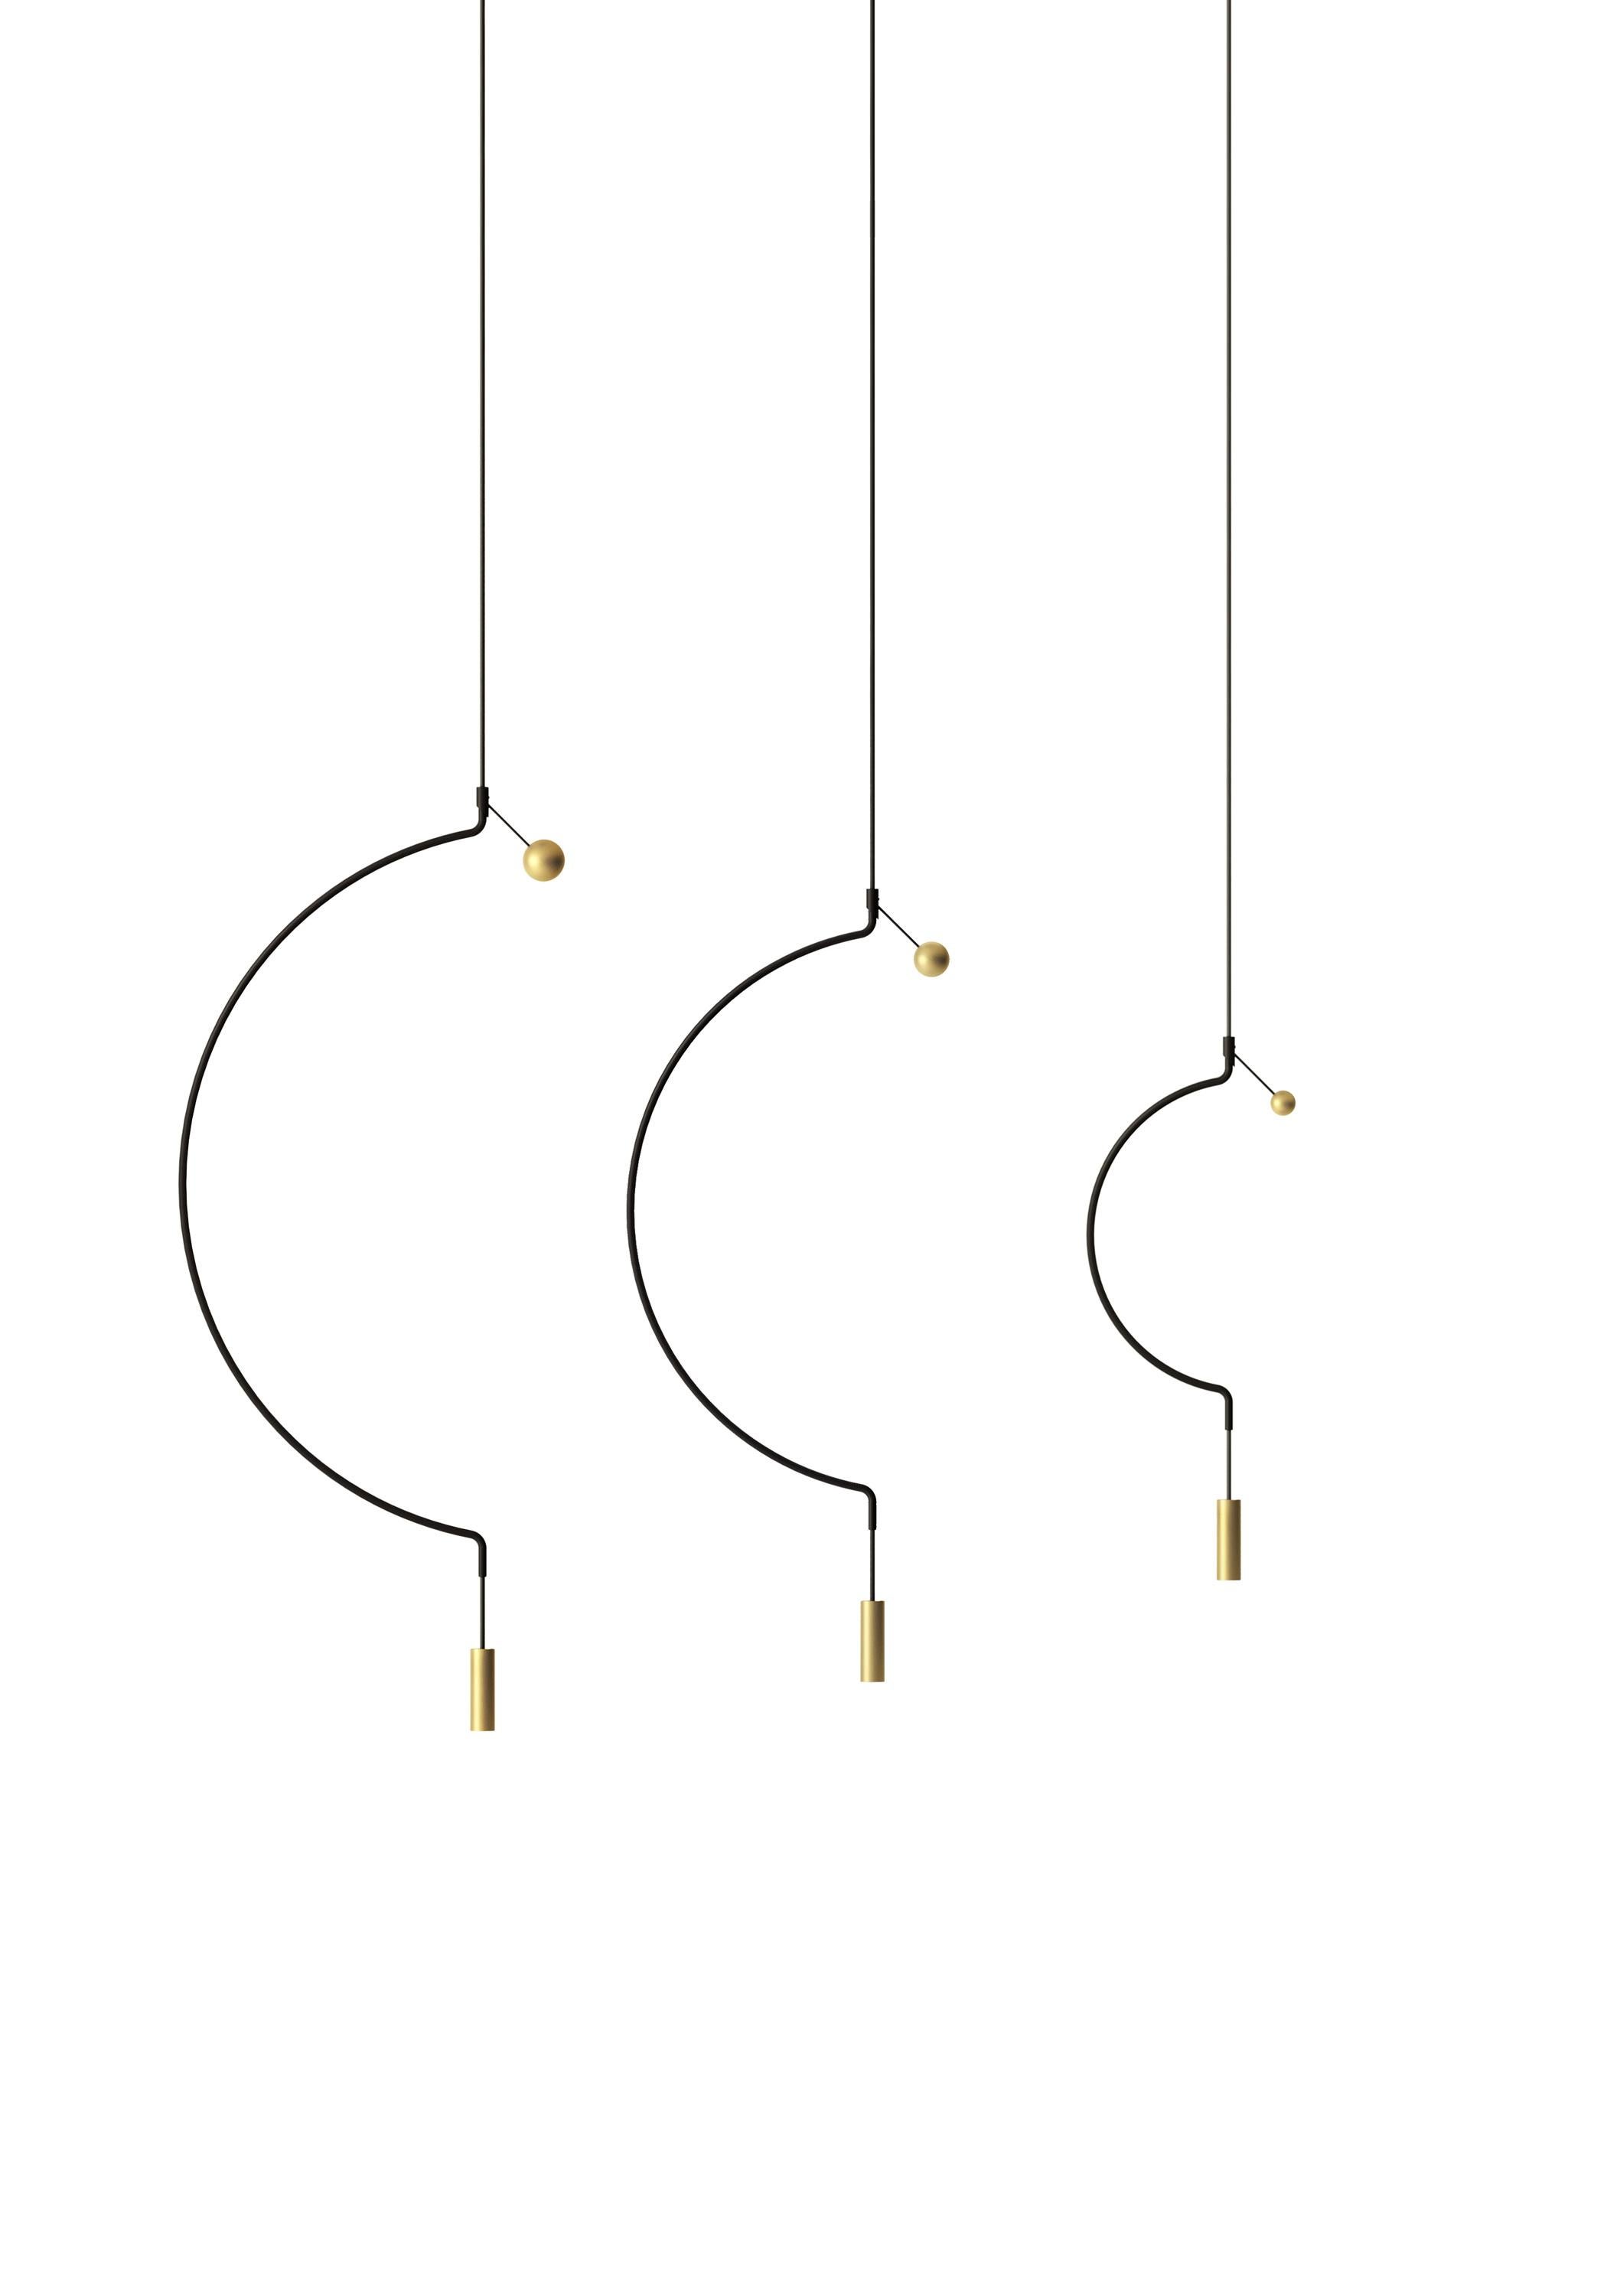 Axolight Liaison Model P1 Pendant Lamp in Black/Black by Sara Moroni

Modular lightness and elegance. Liaison tells about the perfect balance of three geometric archetypes: sphere, circle and cylinder compose a system that includes the single